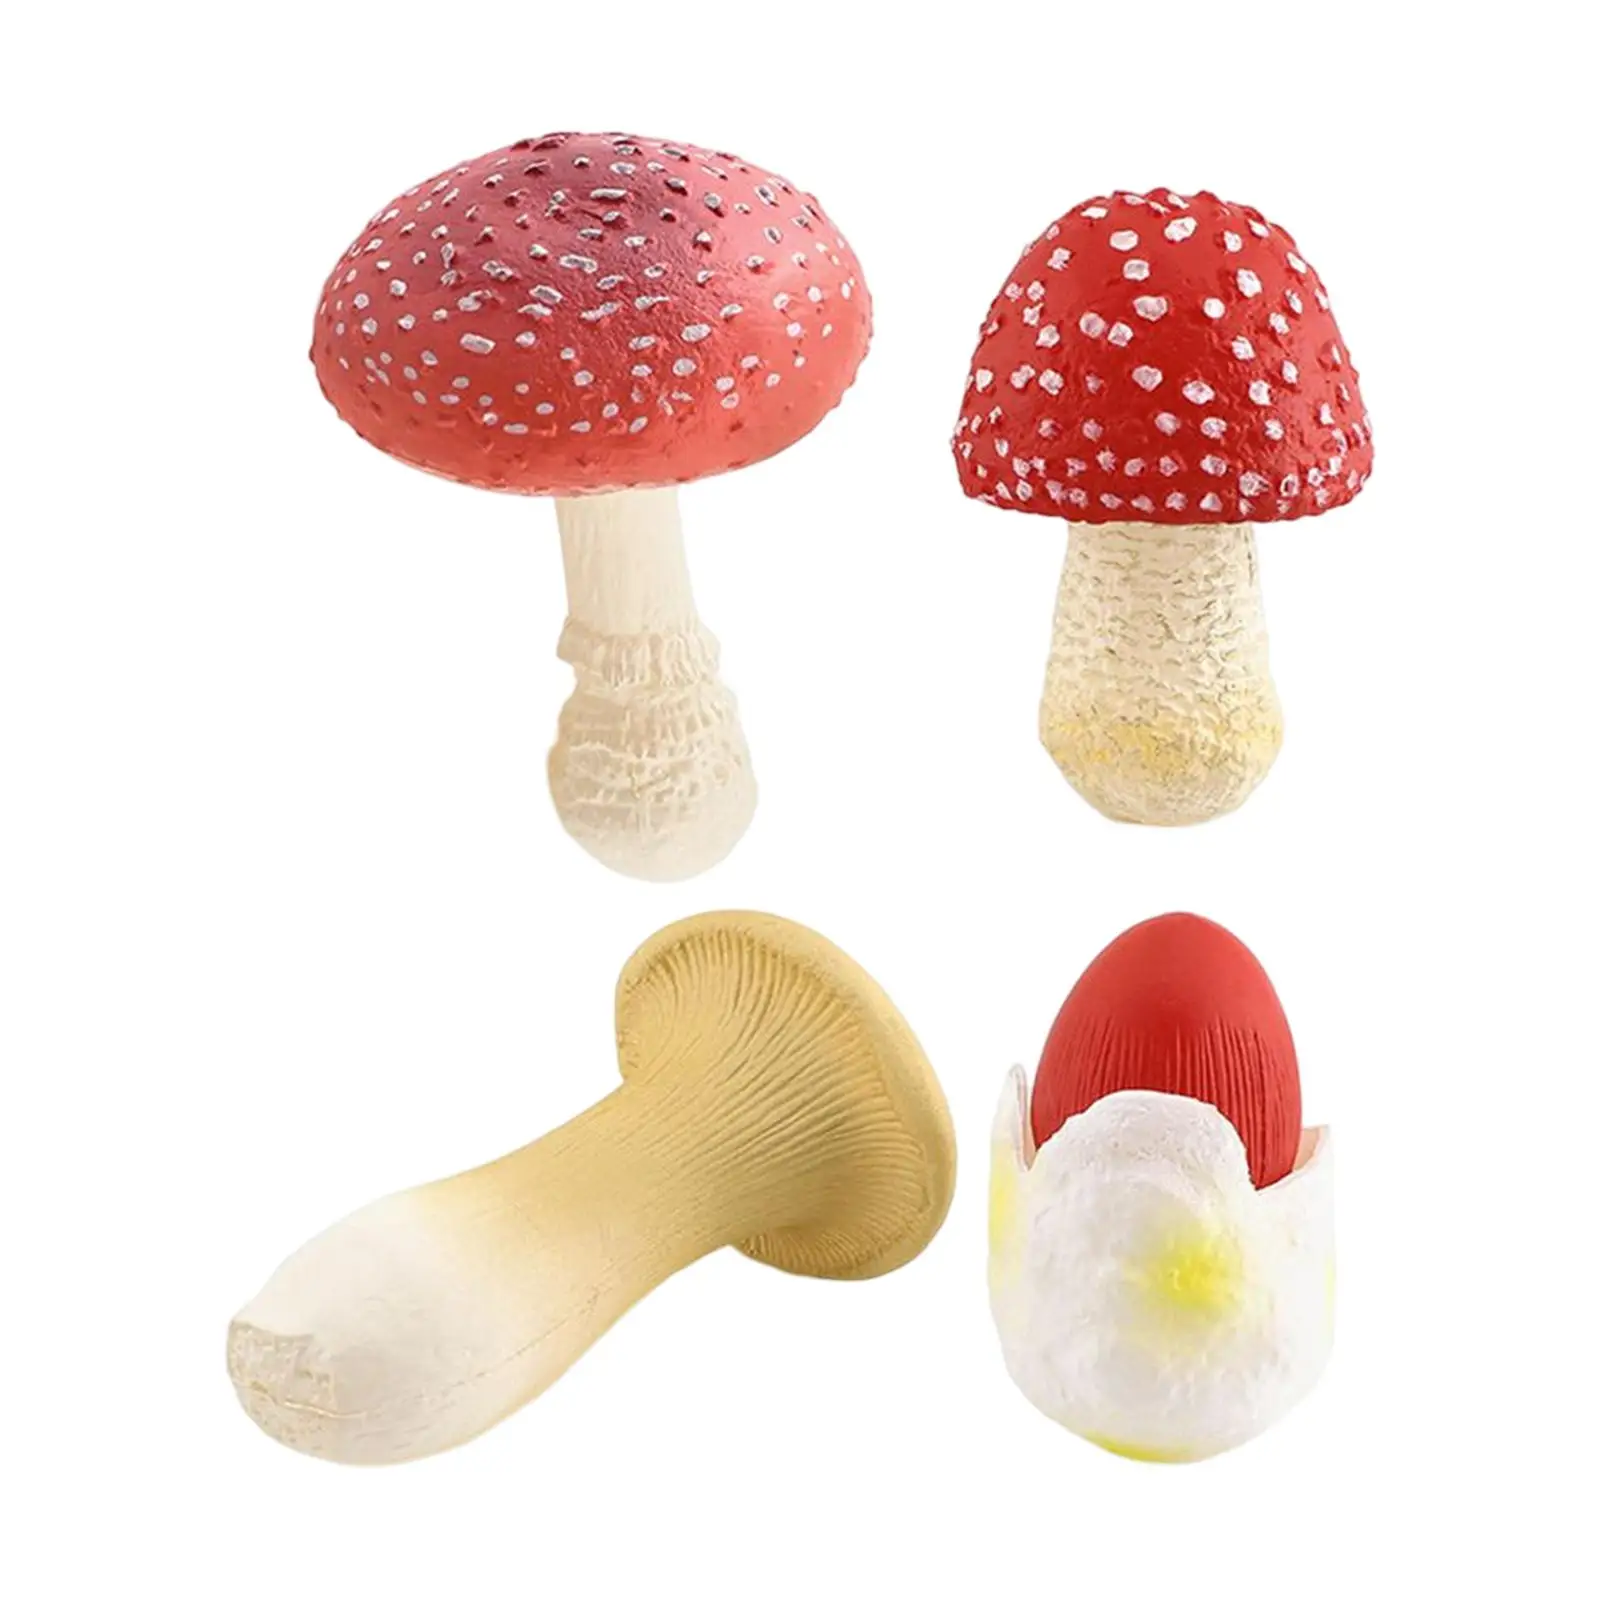 4 Pieces Mushroom Model Educational Toy Vegetable Statues for Girls Boys